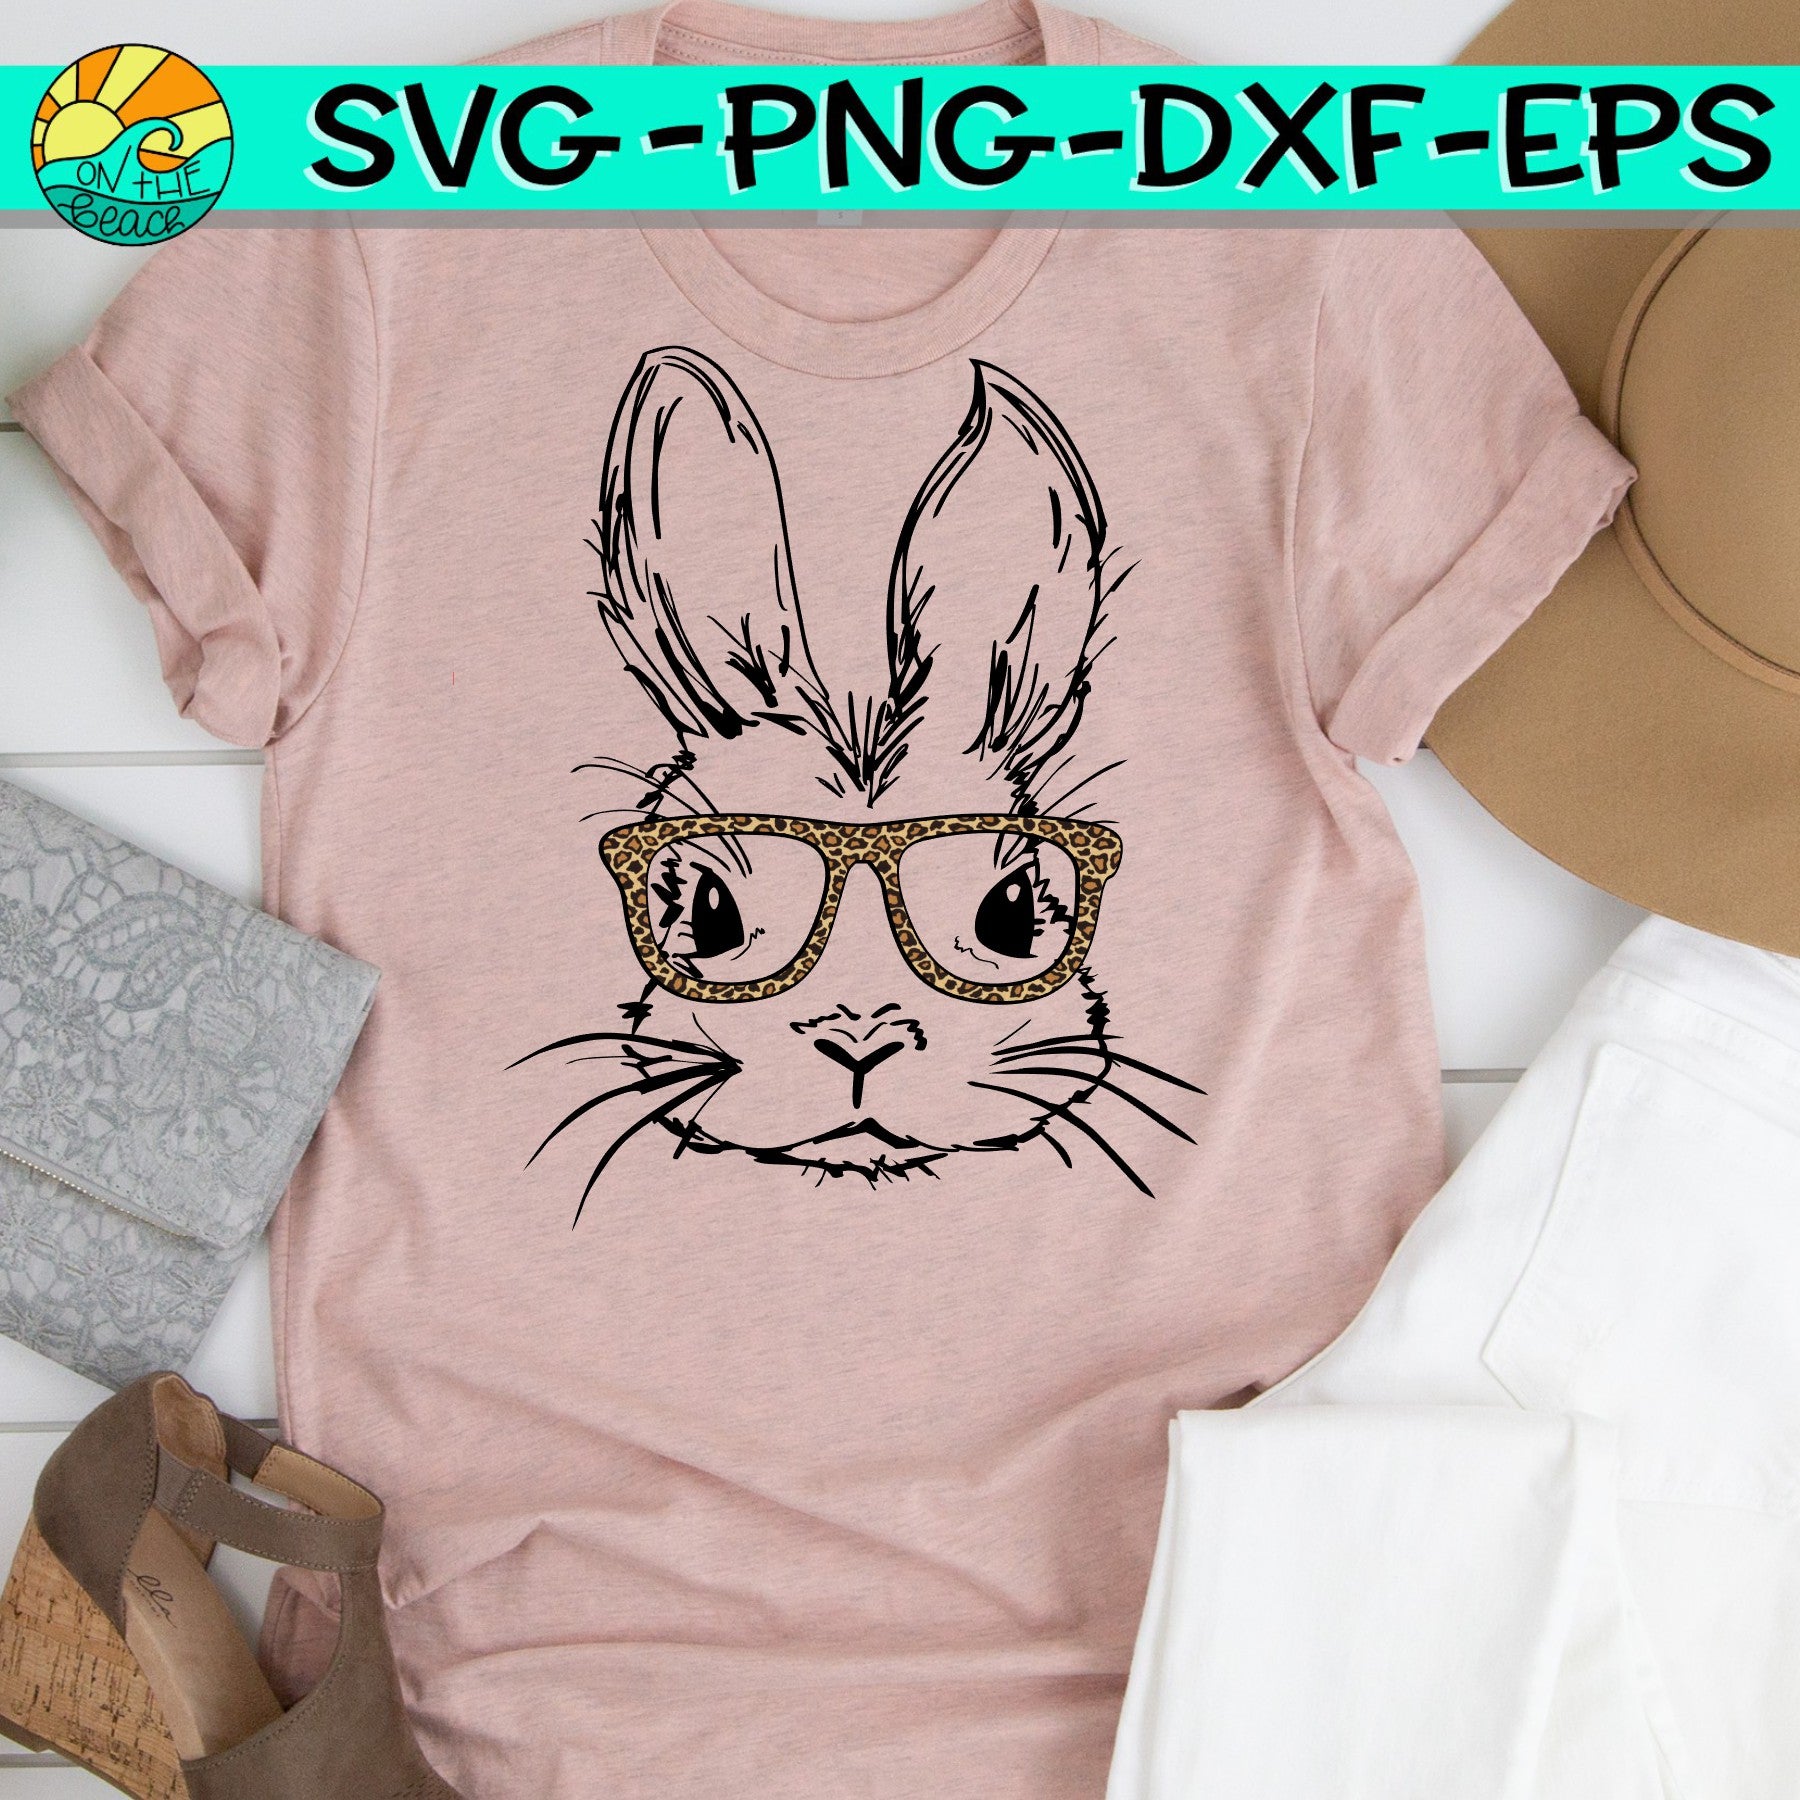 easter bunny with glasses